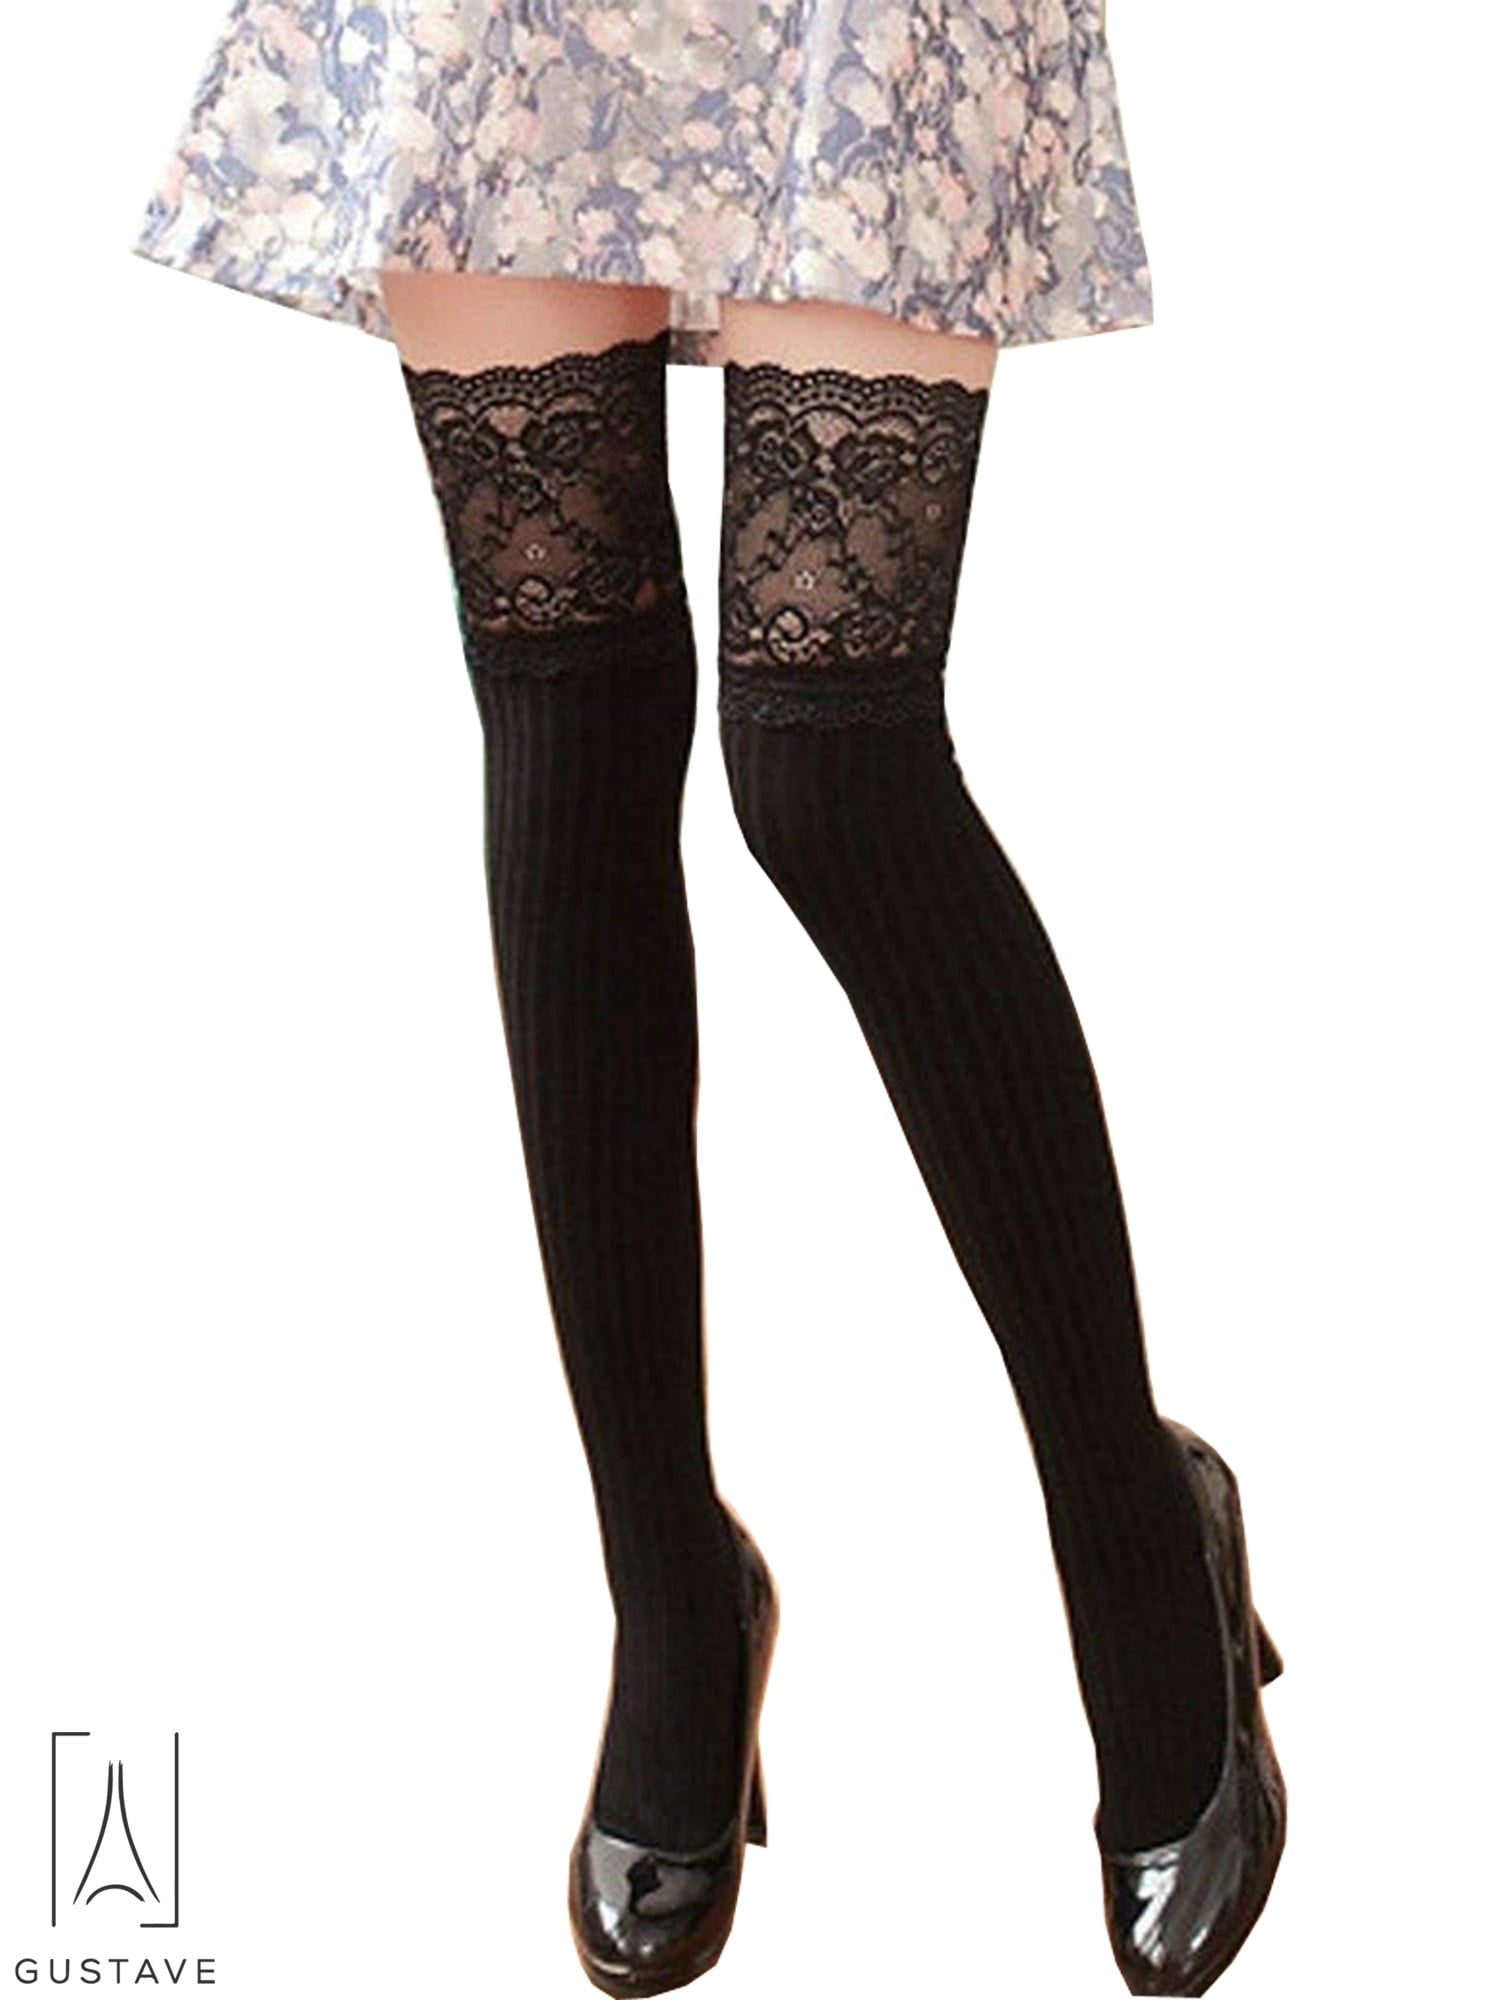 Girl Stretchy Meias Over The Knee High Socks Stockings Tights With Bows Thigh L3